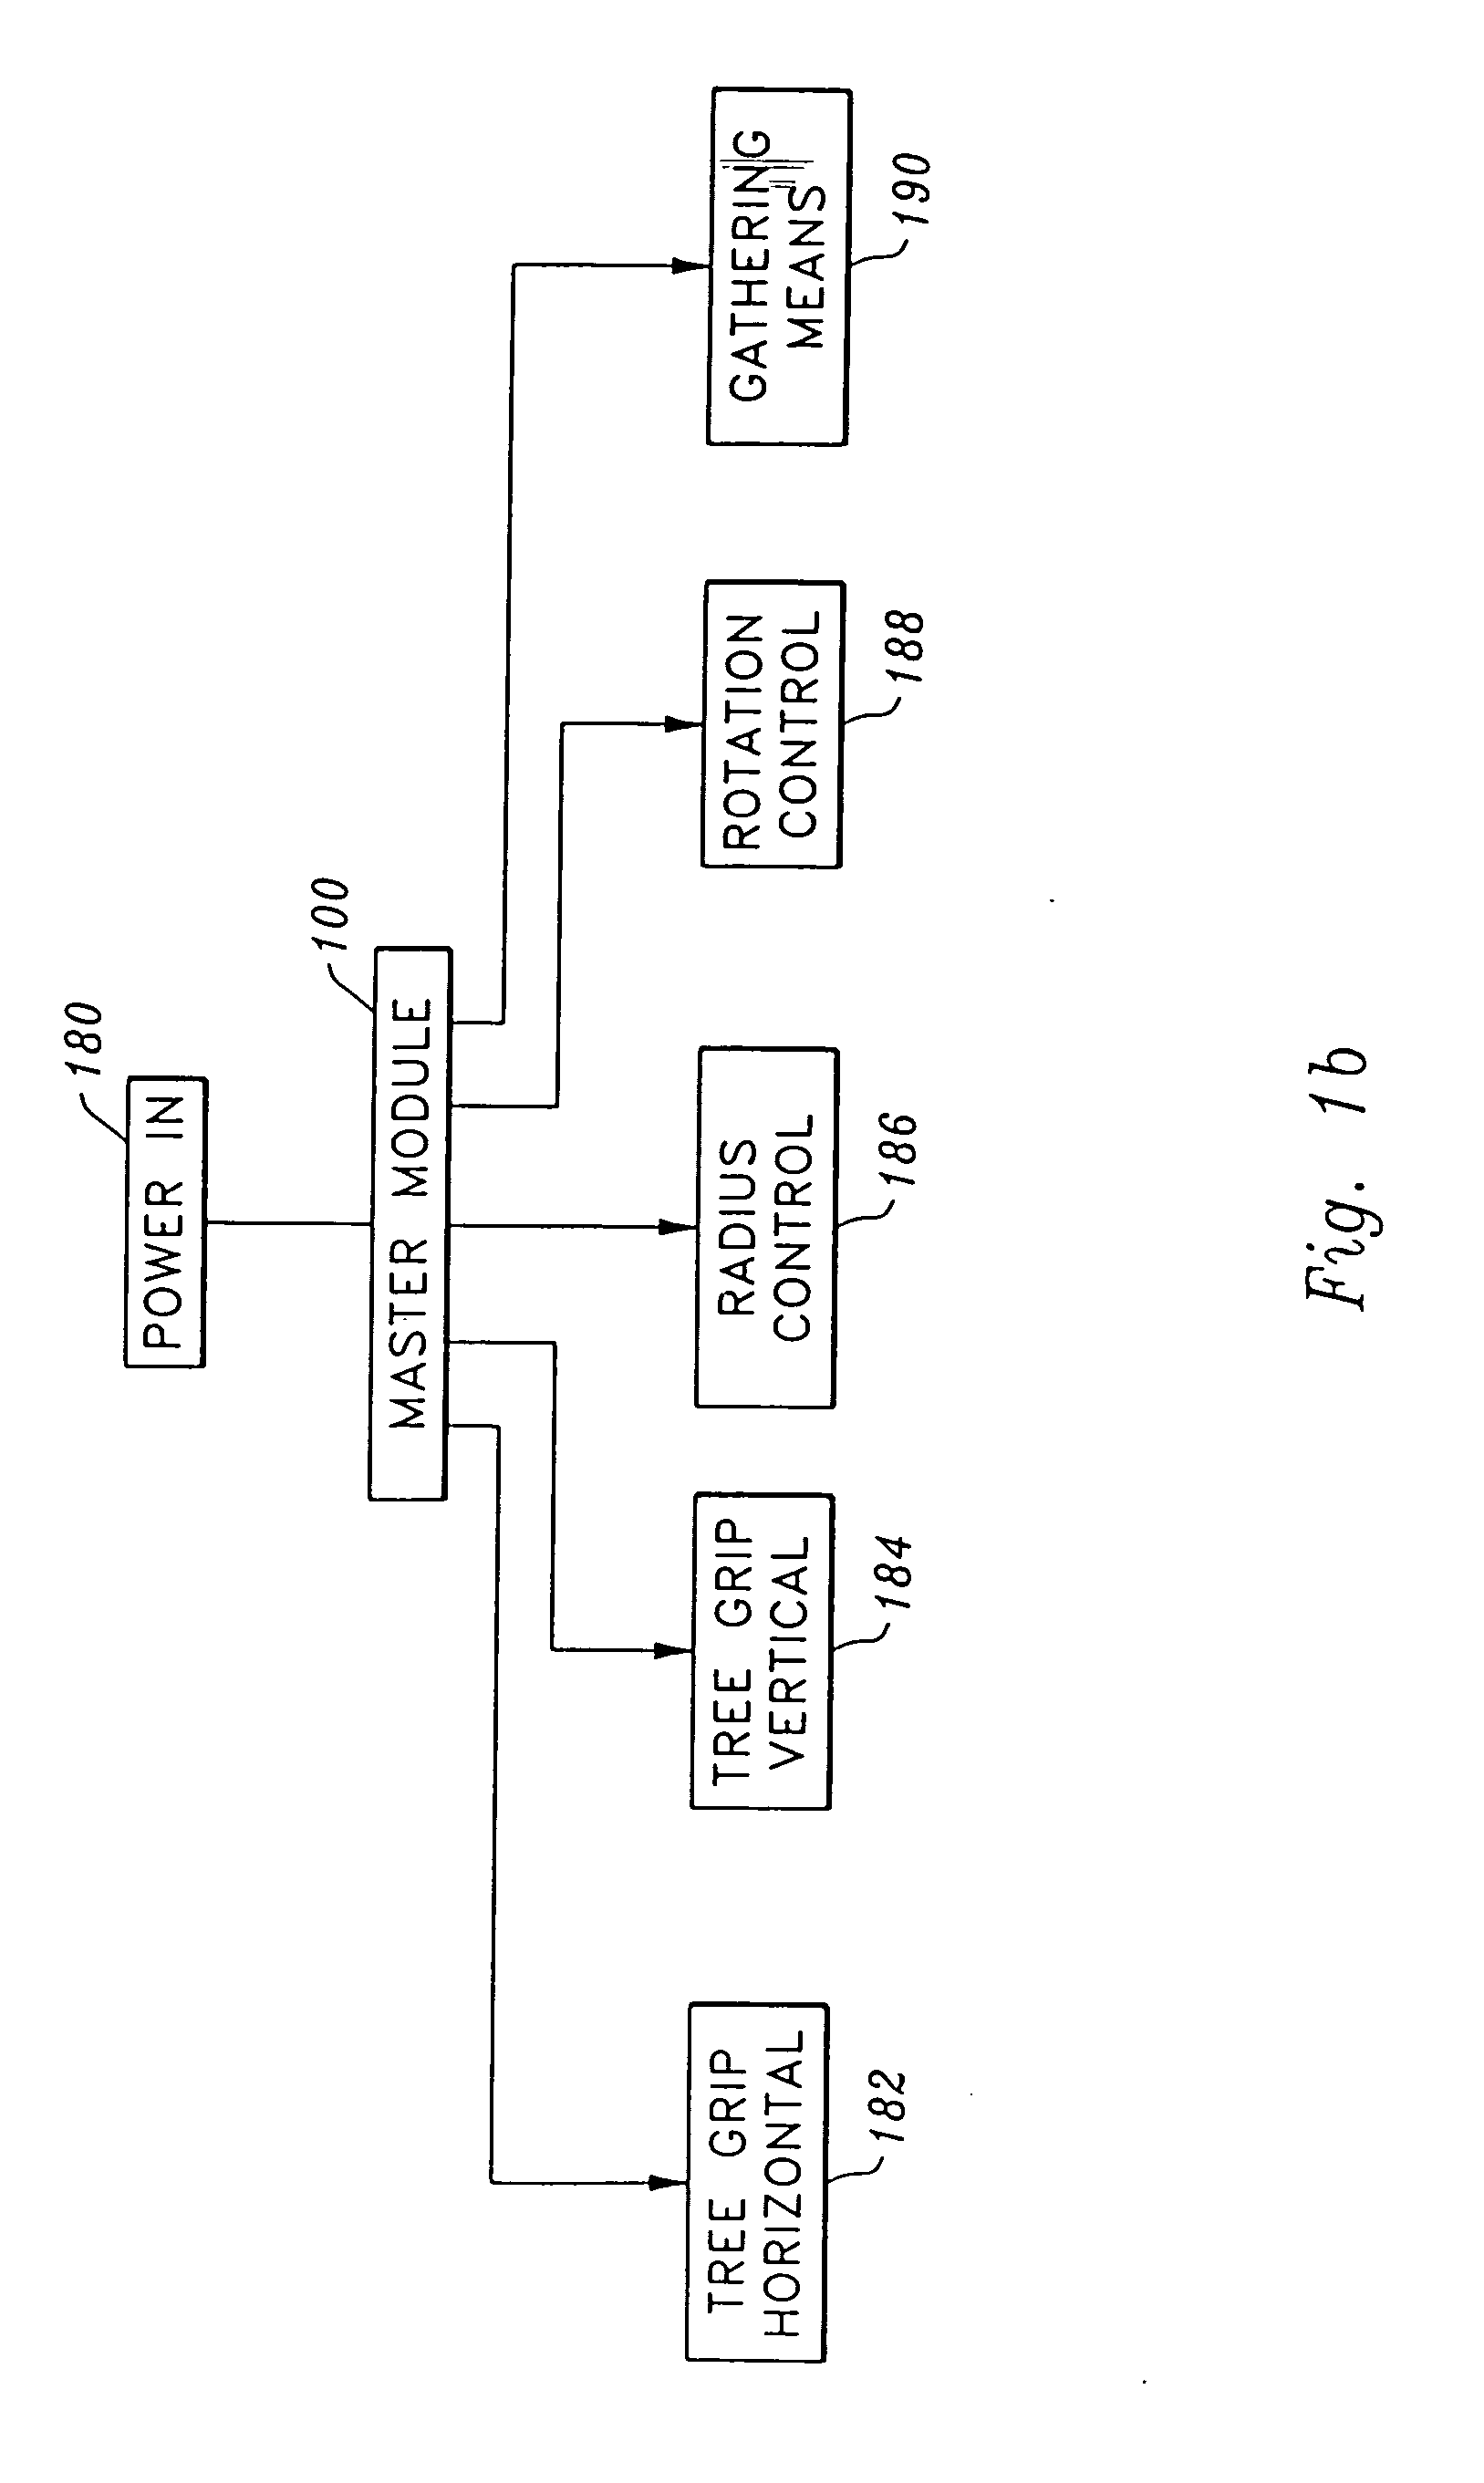 Method and apparatus for control of hydraulic systems